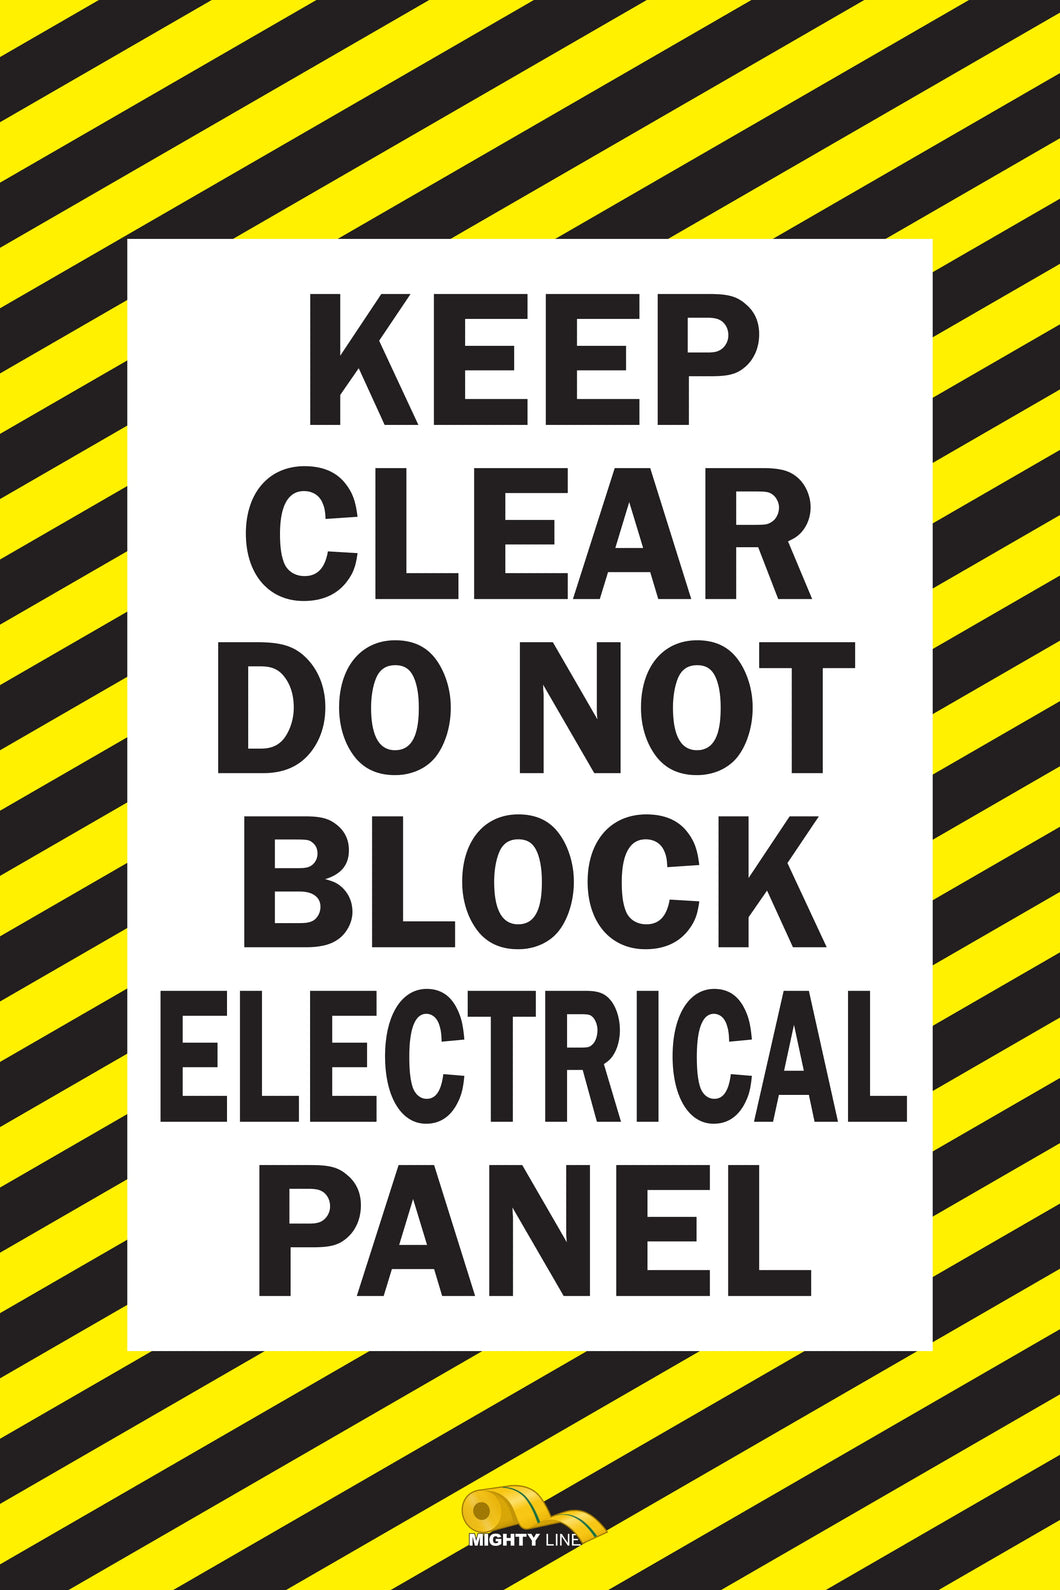 Keep Clear Do Not Block Electrical Panel, Mighty Line Floor Sign, Industrial Strength, 36x42